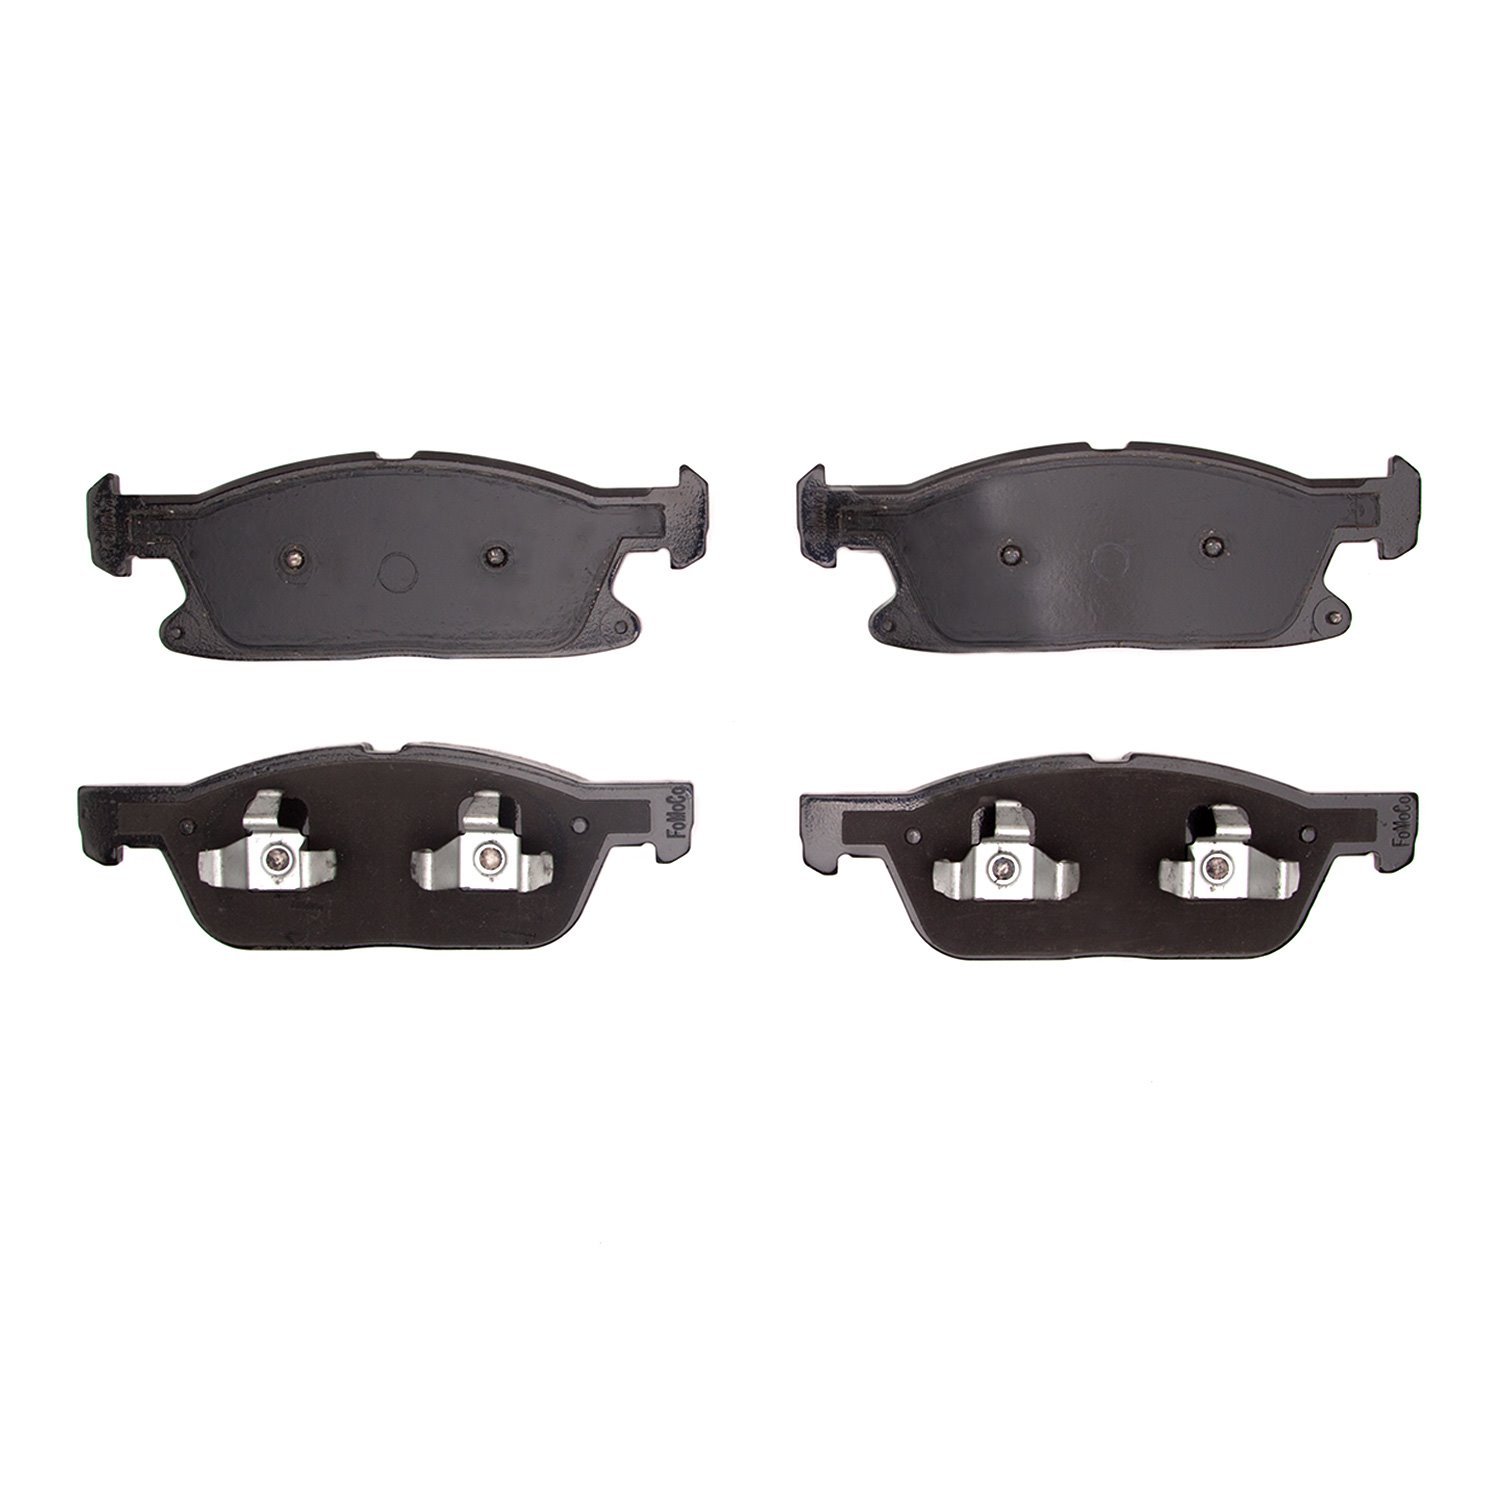 1551-2180-00 5000 Advanced Ceramic Brake Pads, Fits Select Ford/Lincoln/Mercury/Mazda, Position: Front